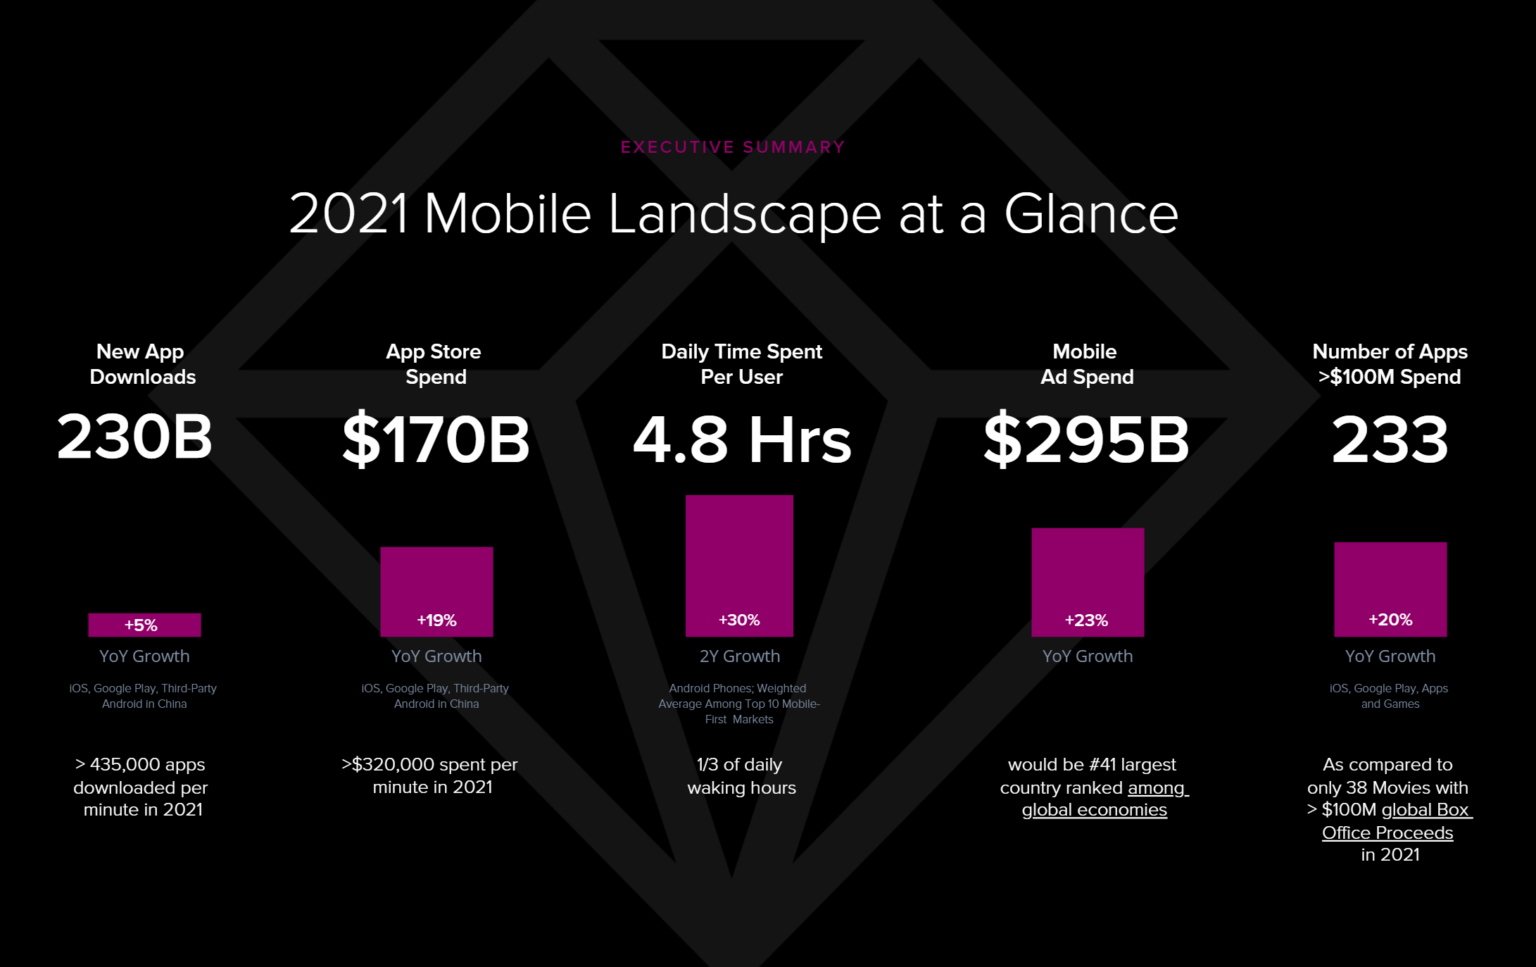 Graphic showing the 2021 mobile landscape